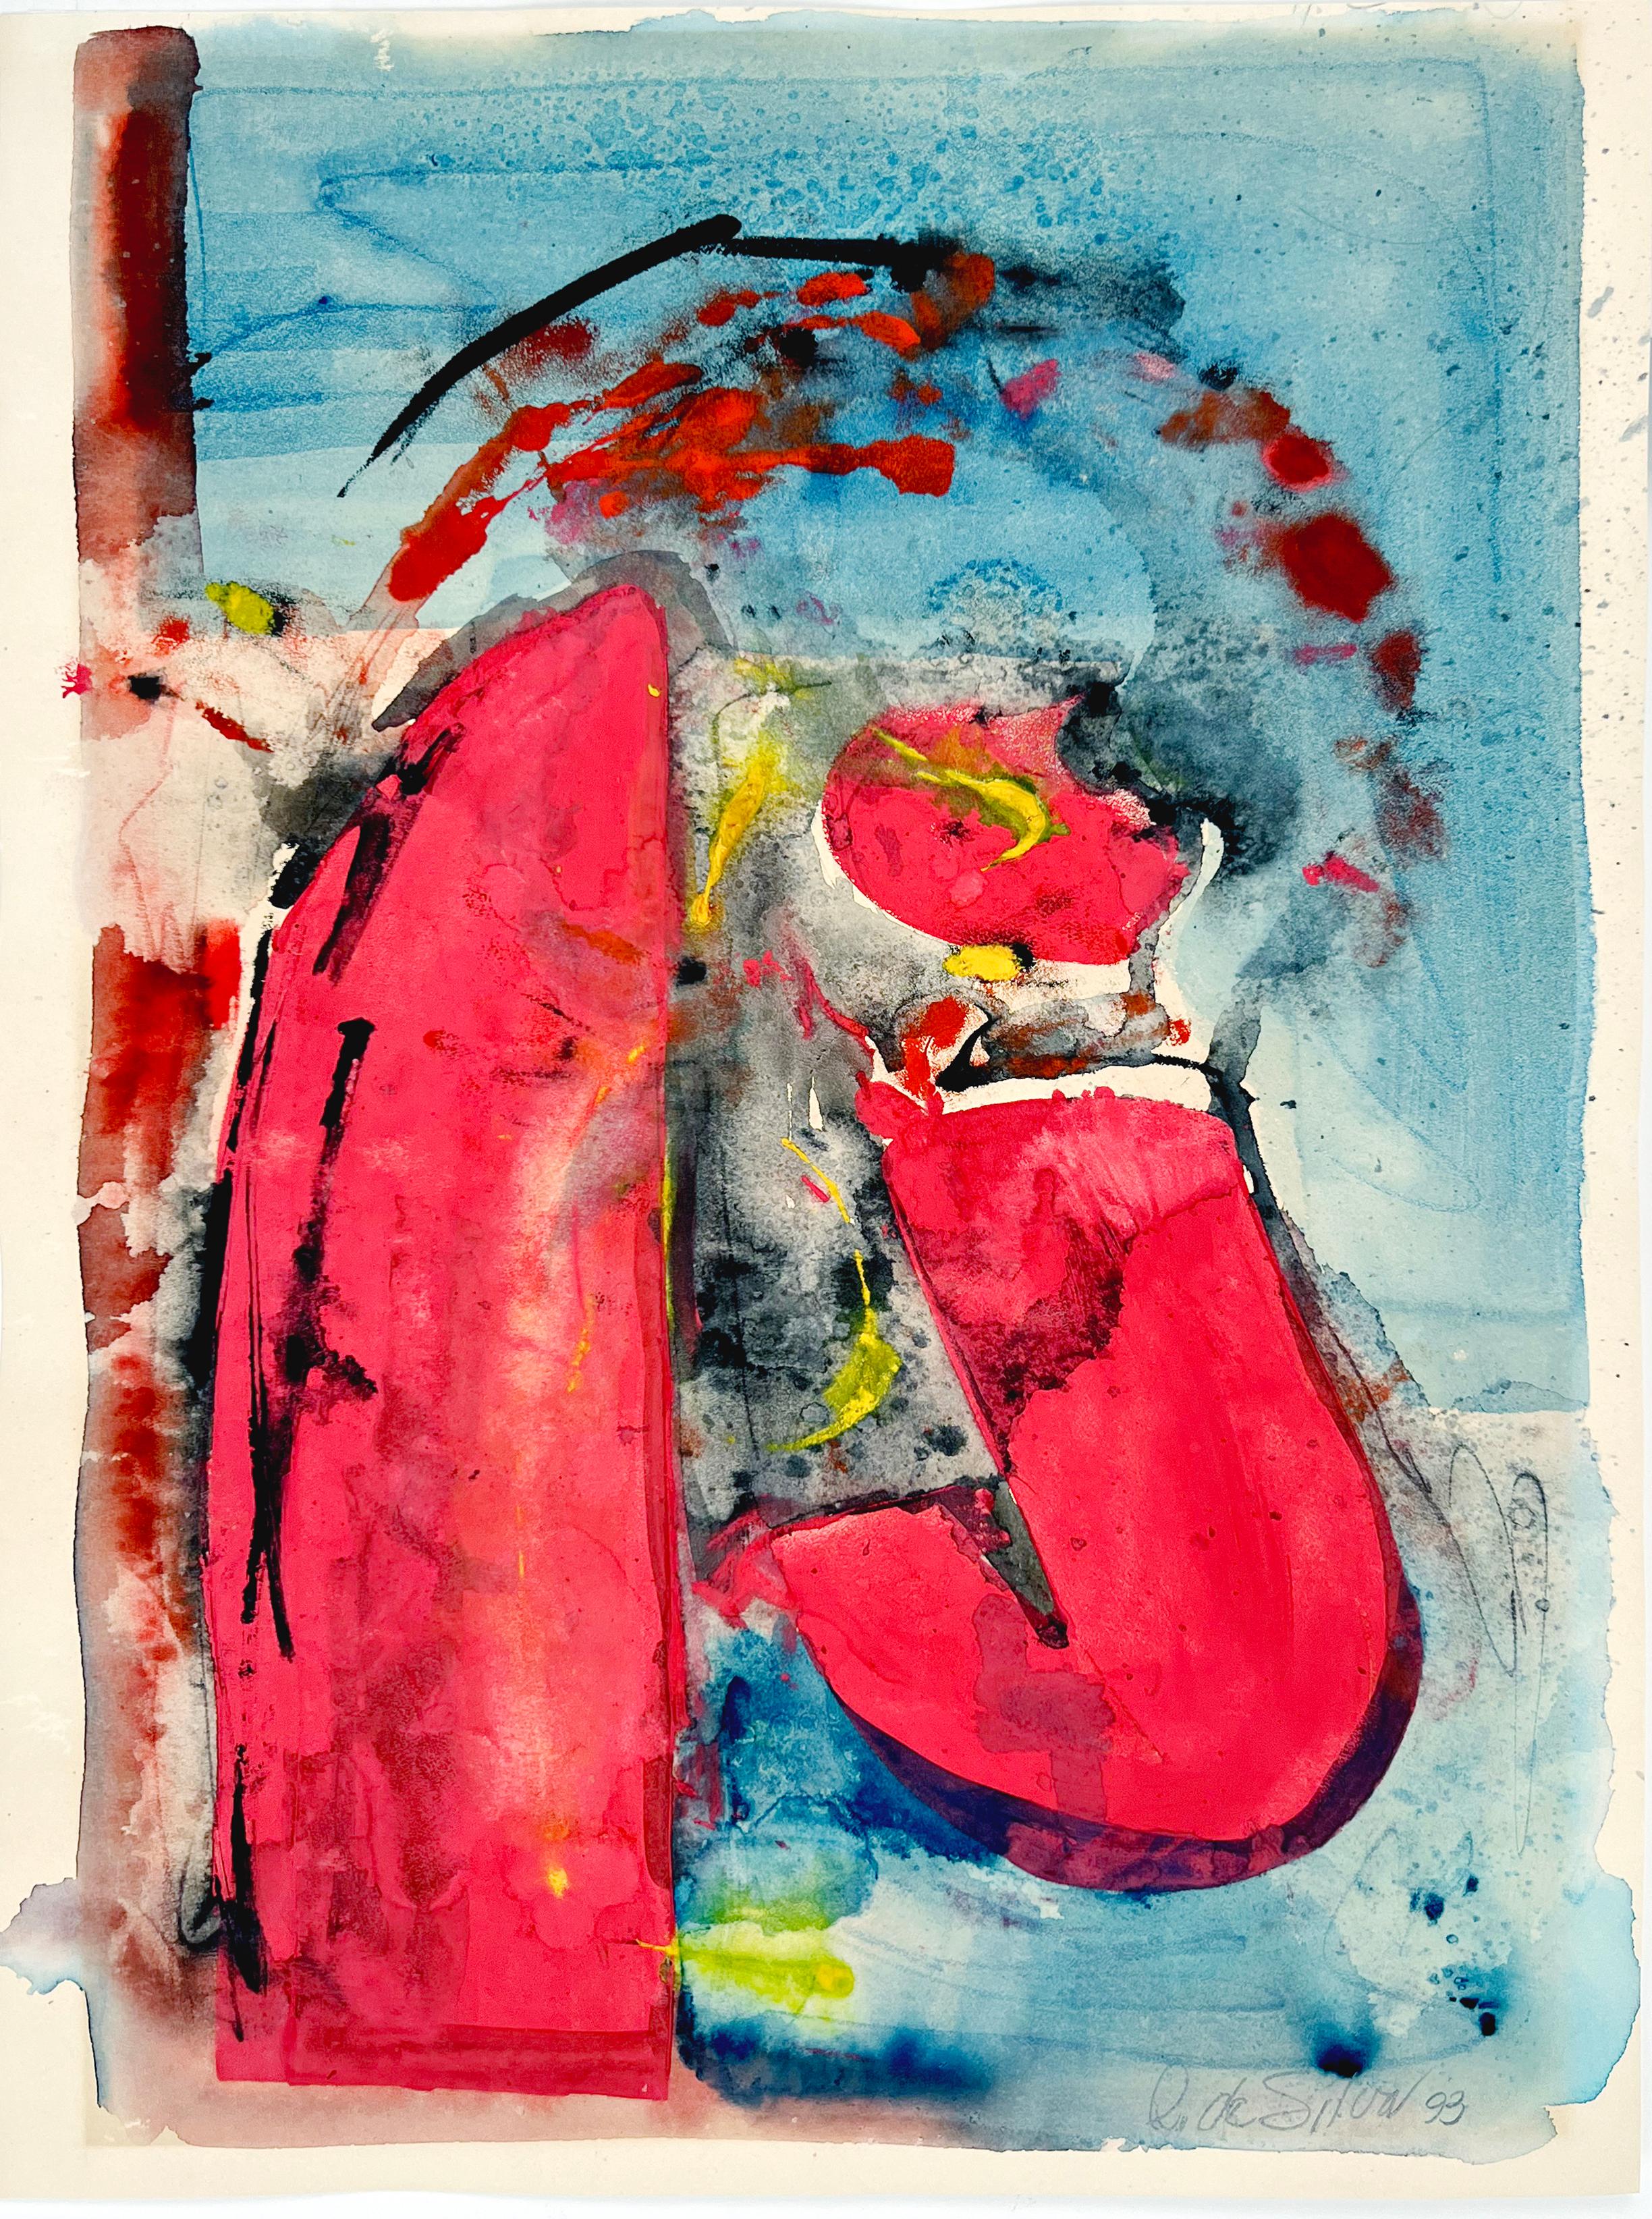 Beach Surf Artist Wizard in red Abstract Figural Acrylic and Watercolor on Paper - Painting by Ricardo de Silva